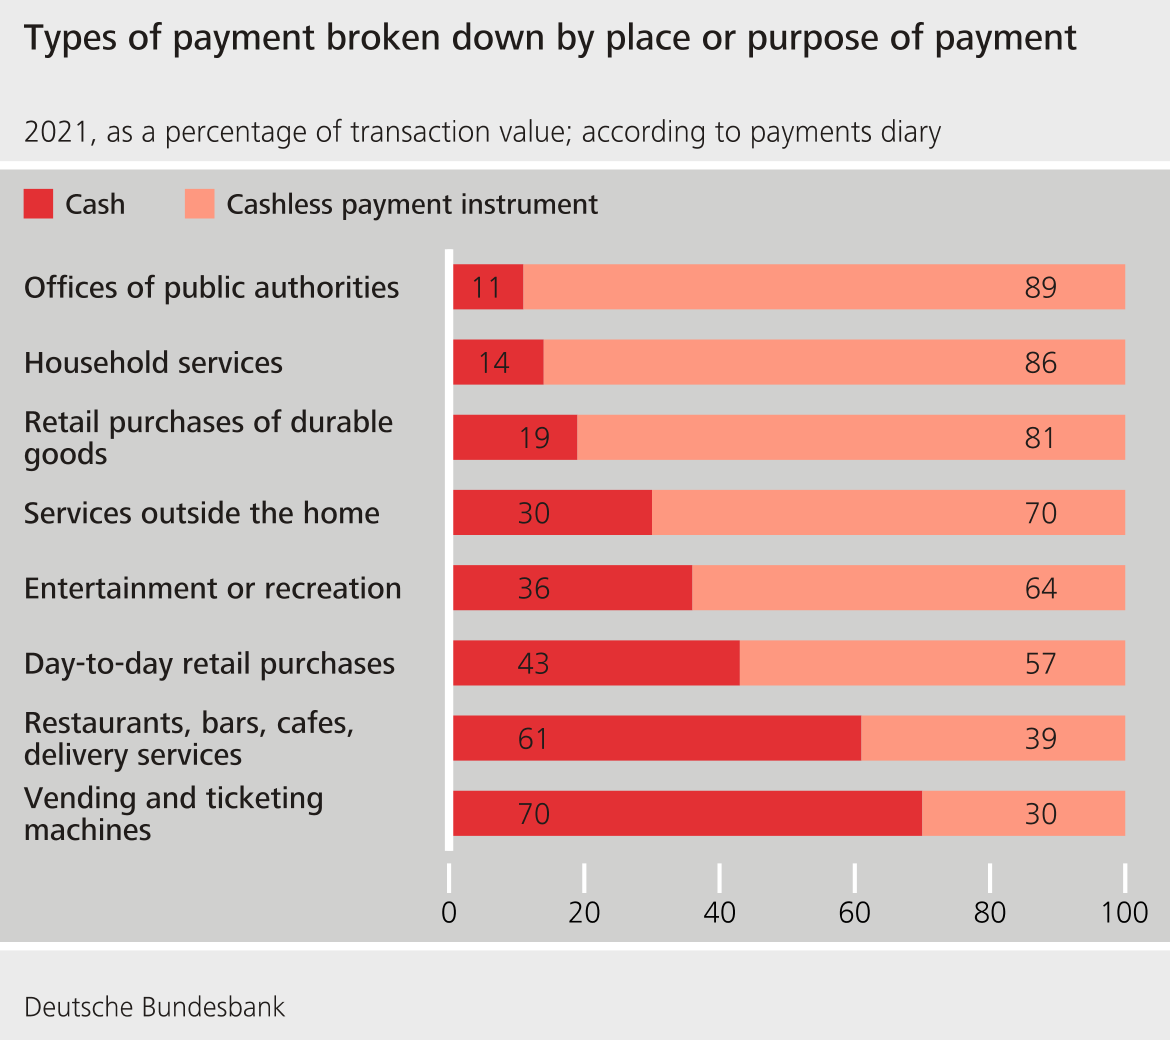 forms of payment nach payment location and -value